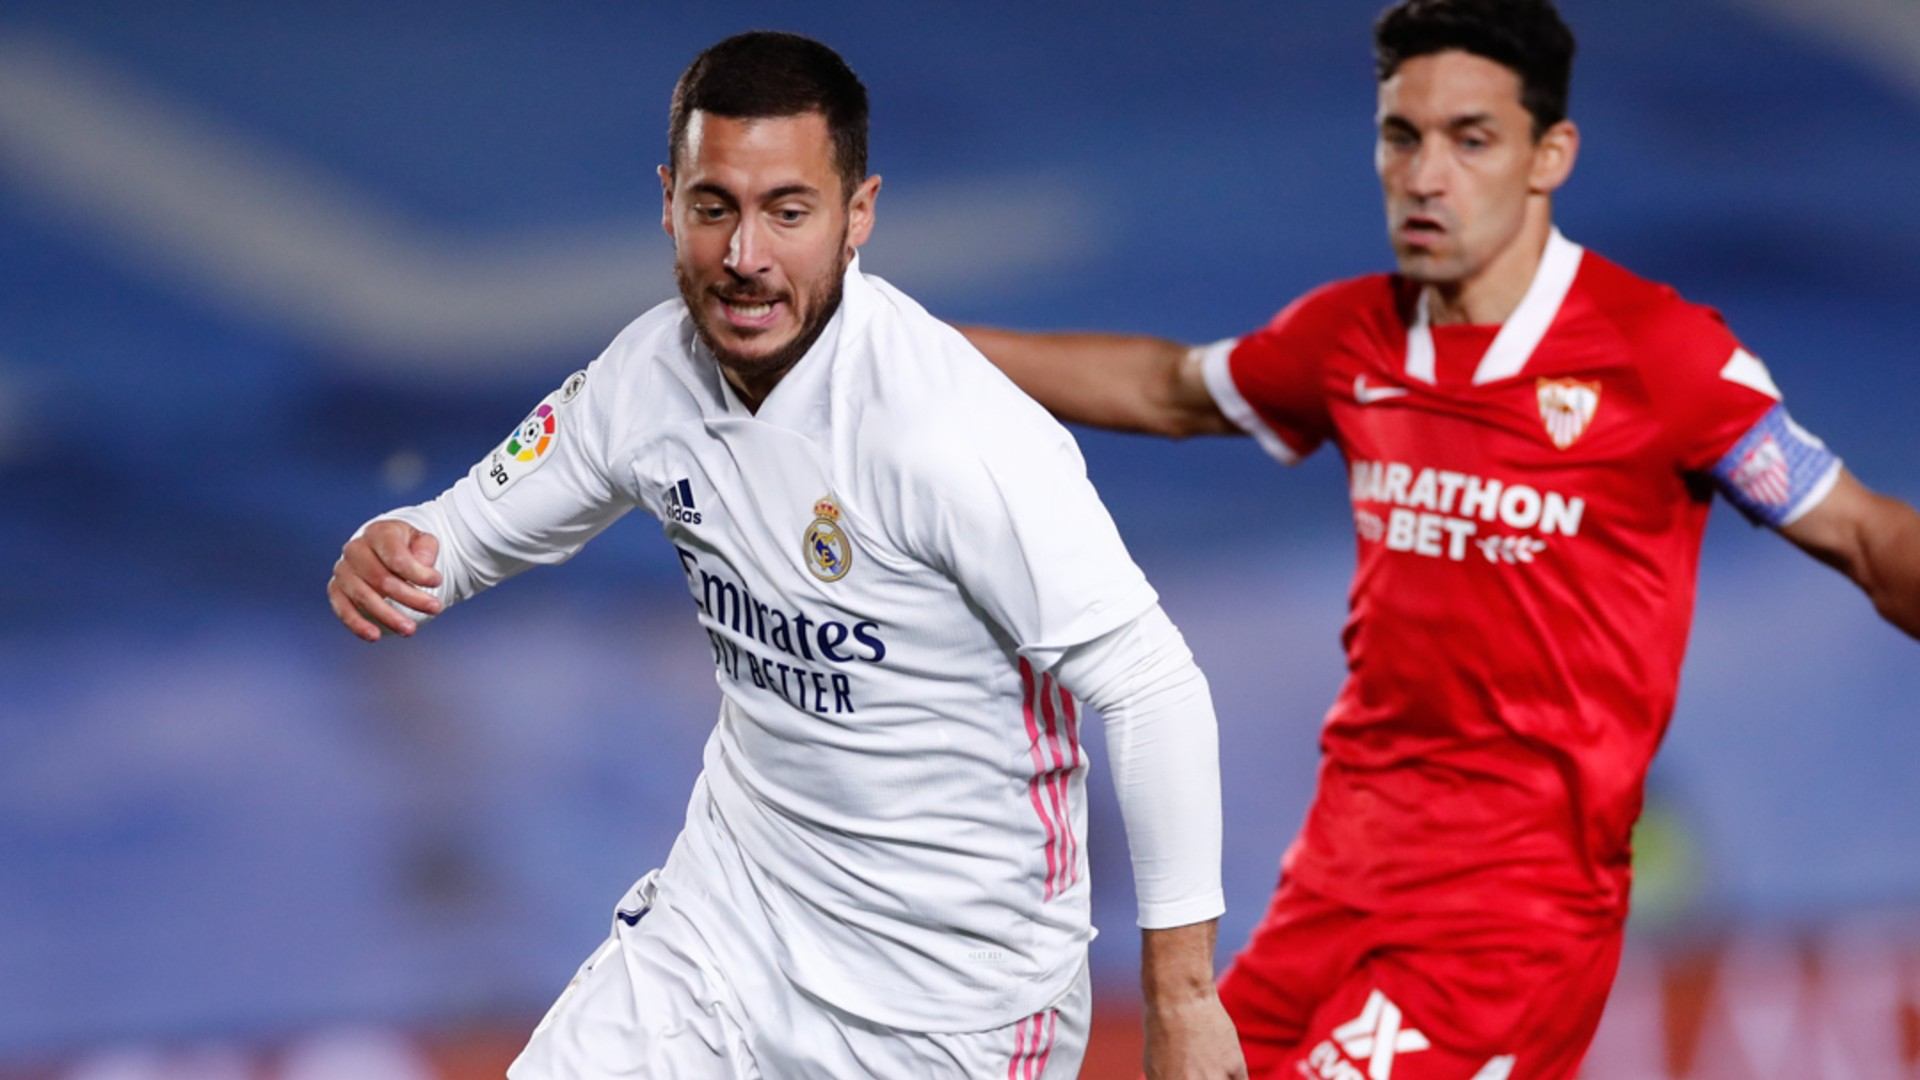 Eden Hazard scored a late equalizer to secure a 2-2 draw against Sevilla on Sunday; Credit: Twitter/@realmadrid